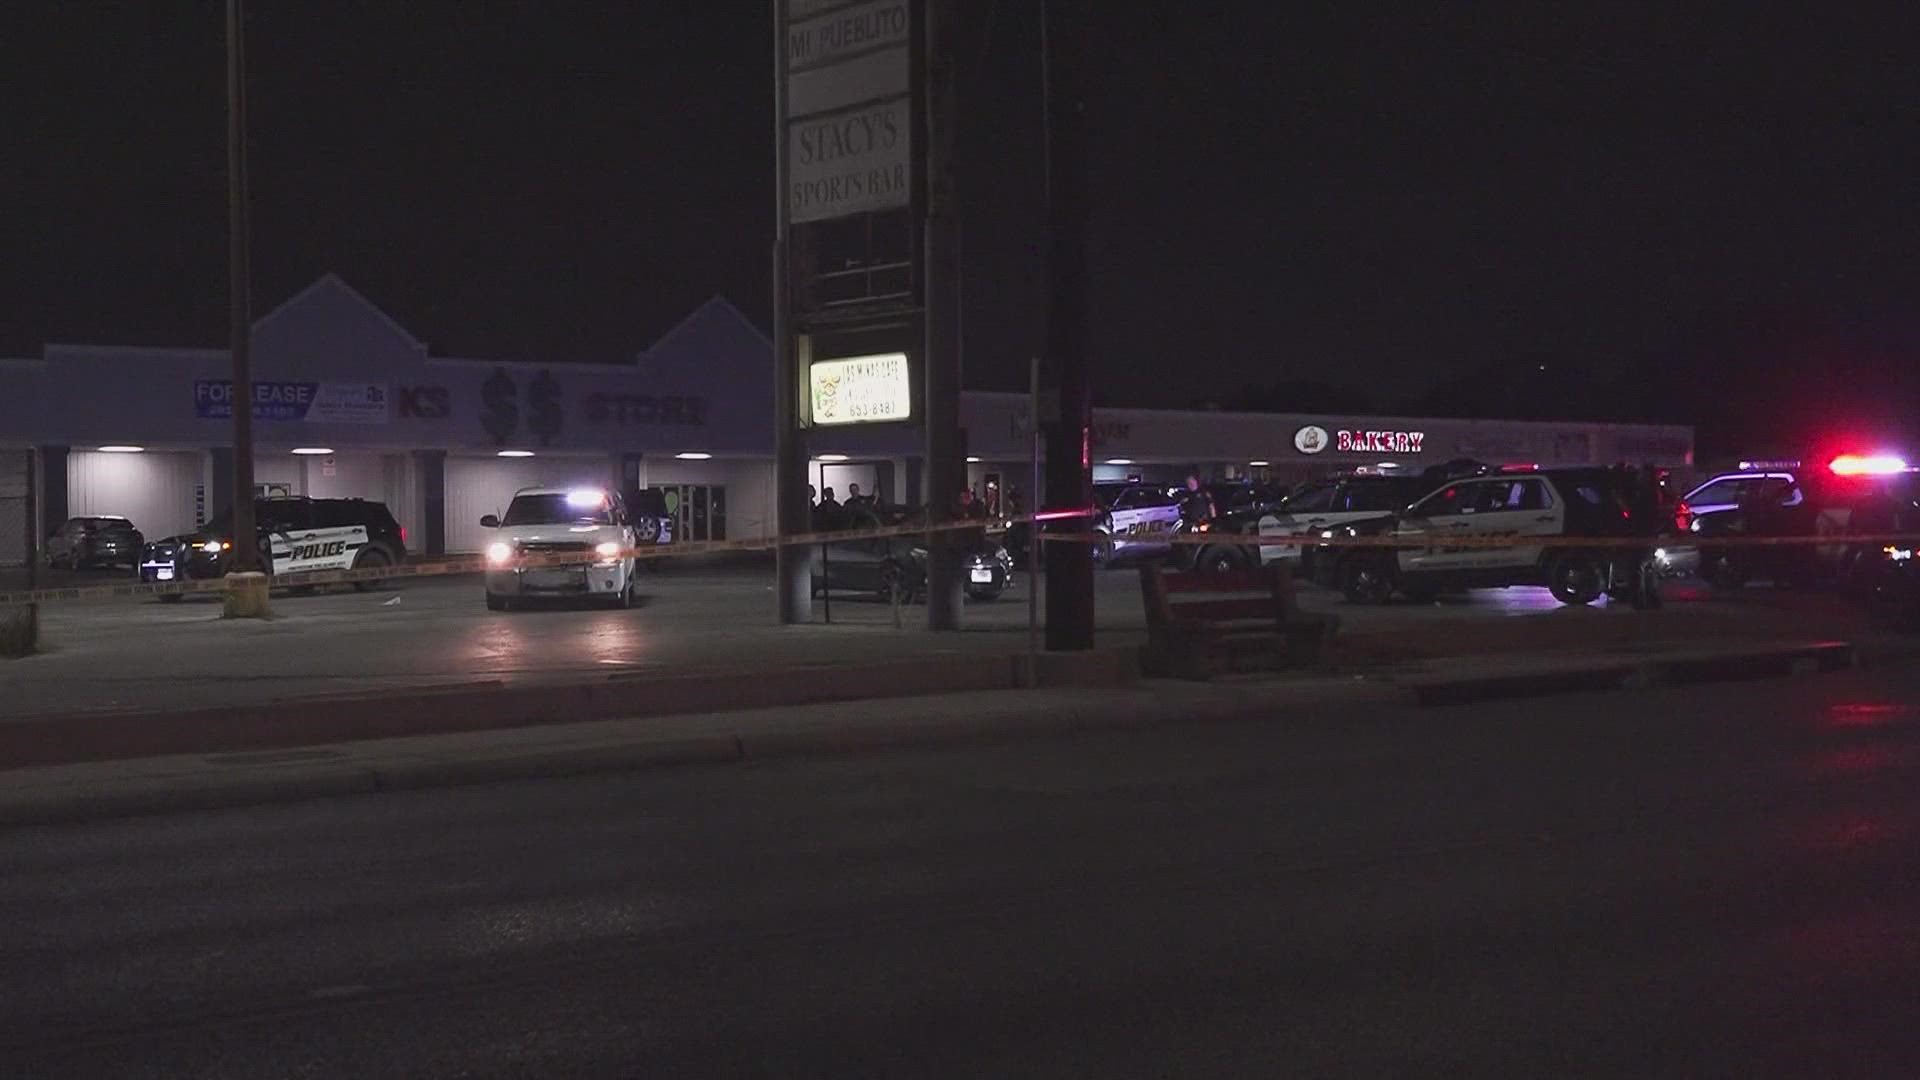 An overnight disturbance at a bar just north of downtown led to four people being shot, two of whom were critically injured.